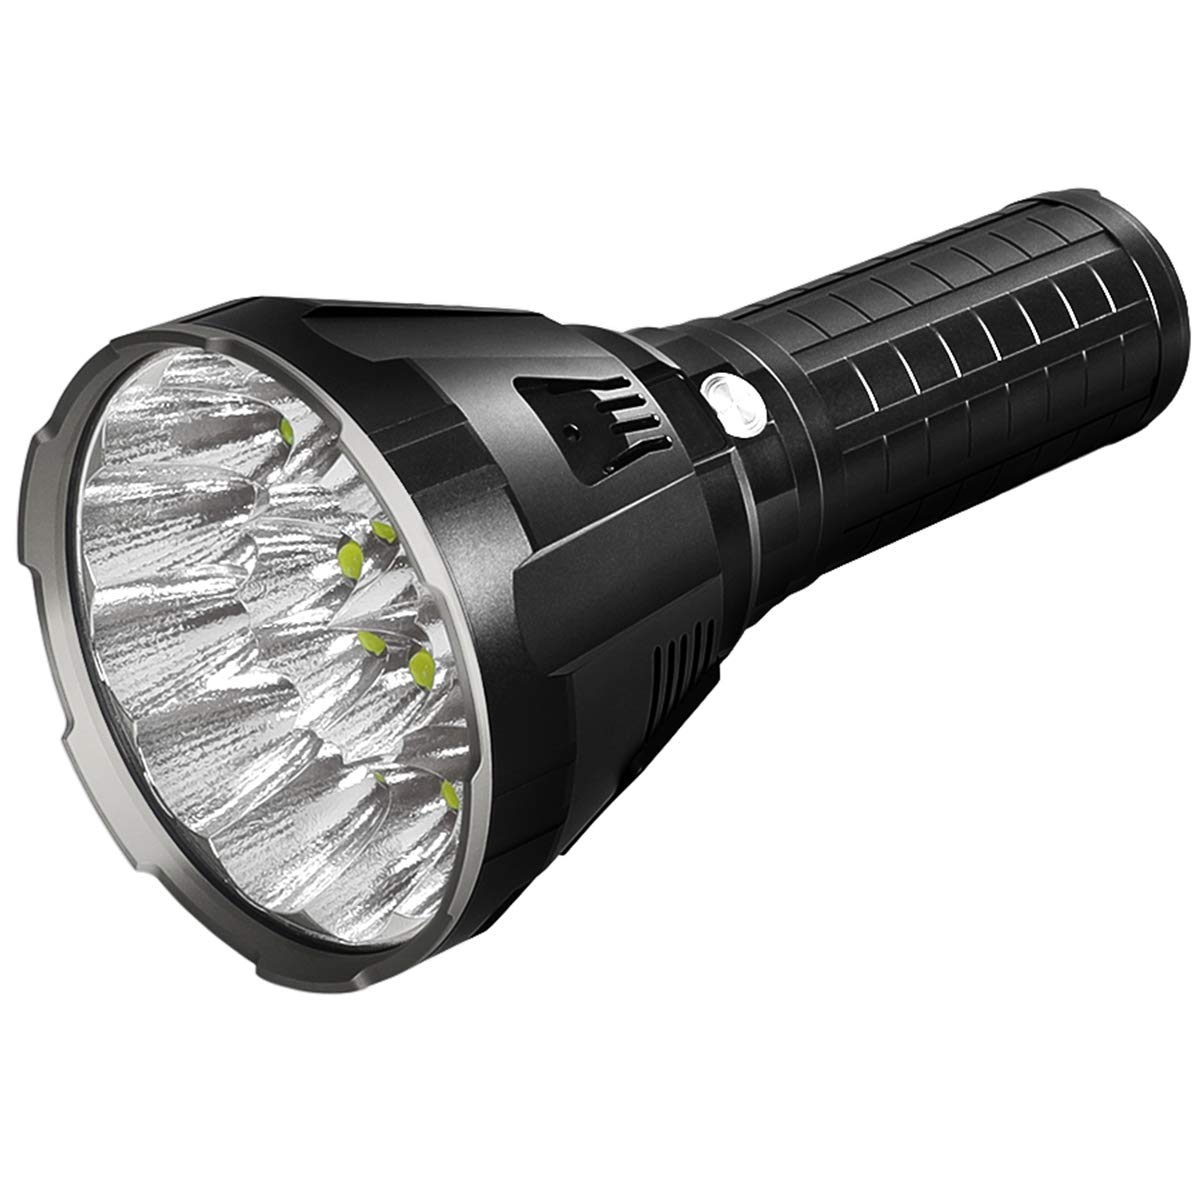 Mua Imalent Ms18 Brightest Flashlight 100,000 Lumens, Led Flashlight 18Pcs  Cree Xhp70.2 Leds, Rechargeable Powerful Torch Long Throw Up To 1350  Meters, With Oled Display And Built-In Cooling Tools Trên Amazon Mỹ